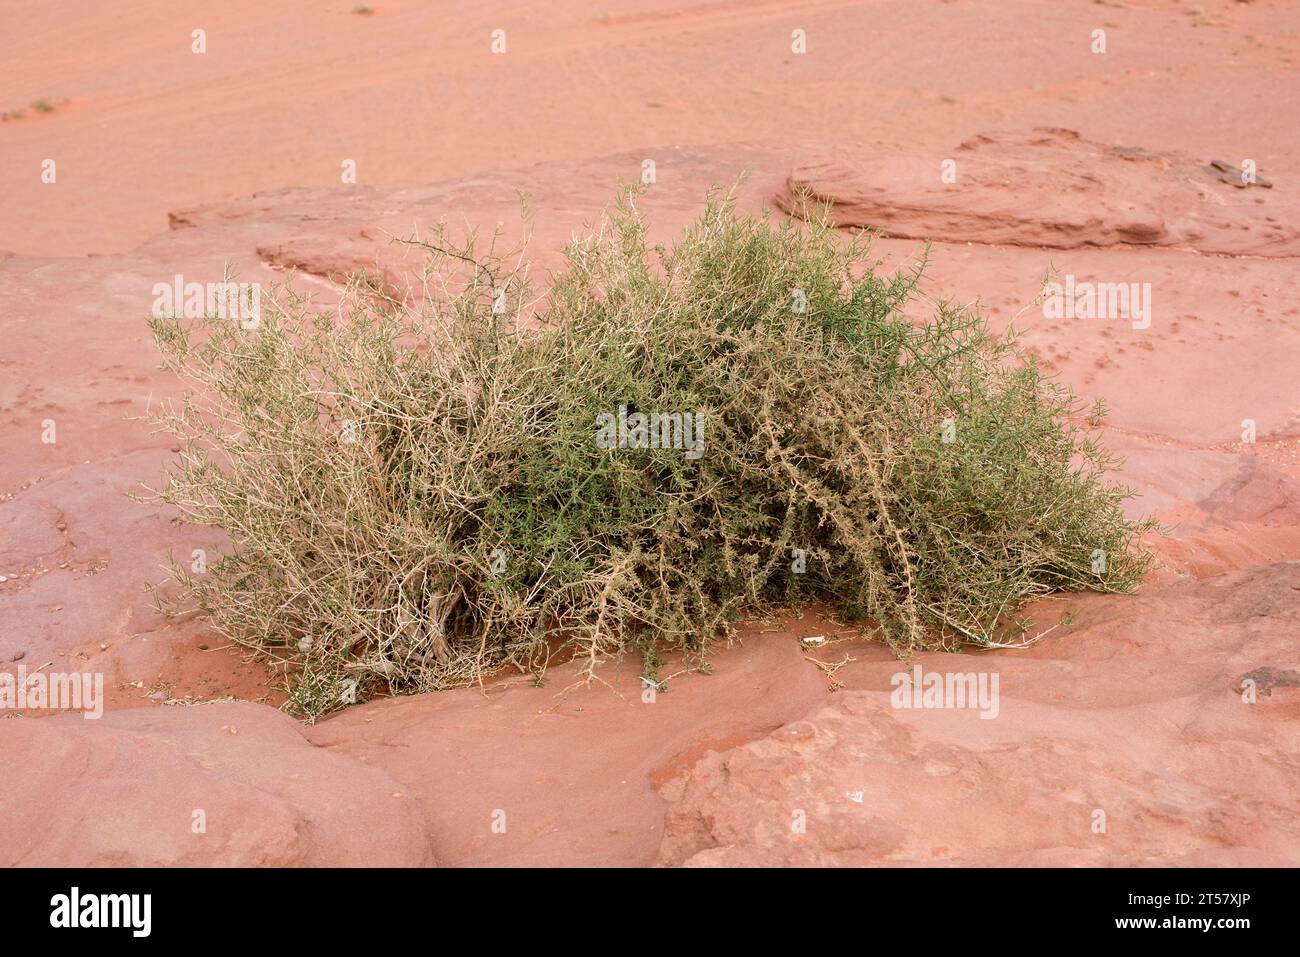 Asparagus horridus or Asparagus stipularis is a branched spiny shrub native to Mediterranean basin. This photo was taken in Jordan. Stock Photo